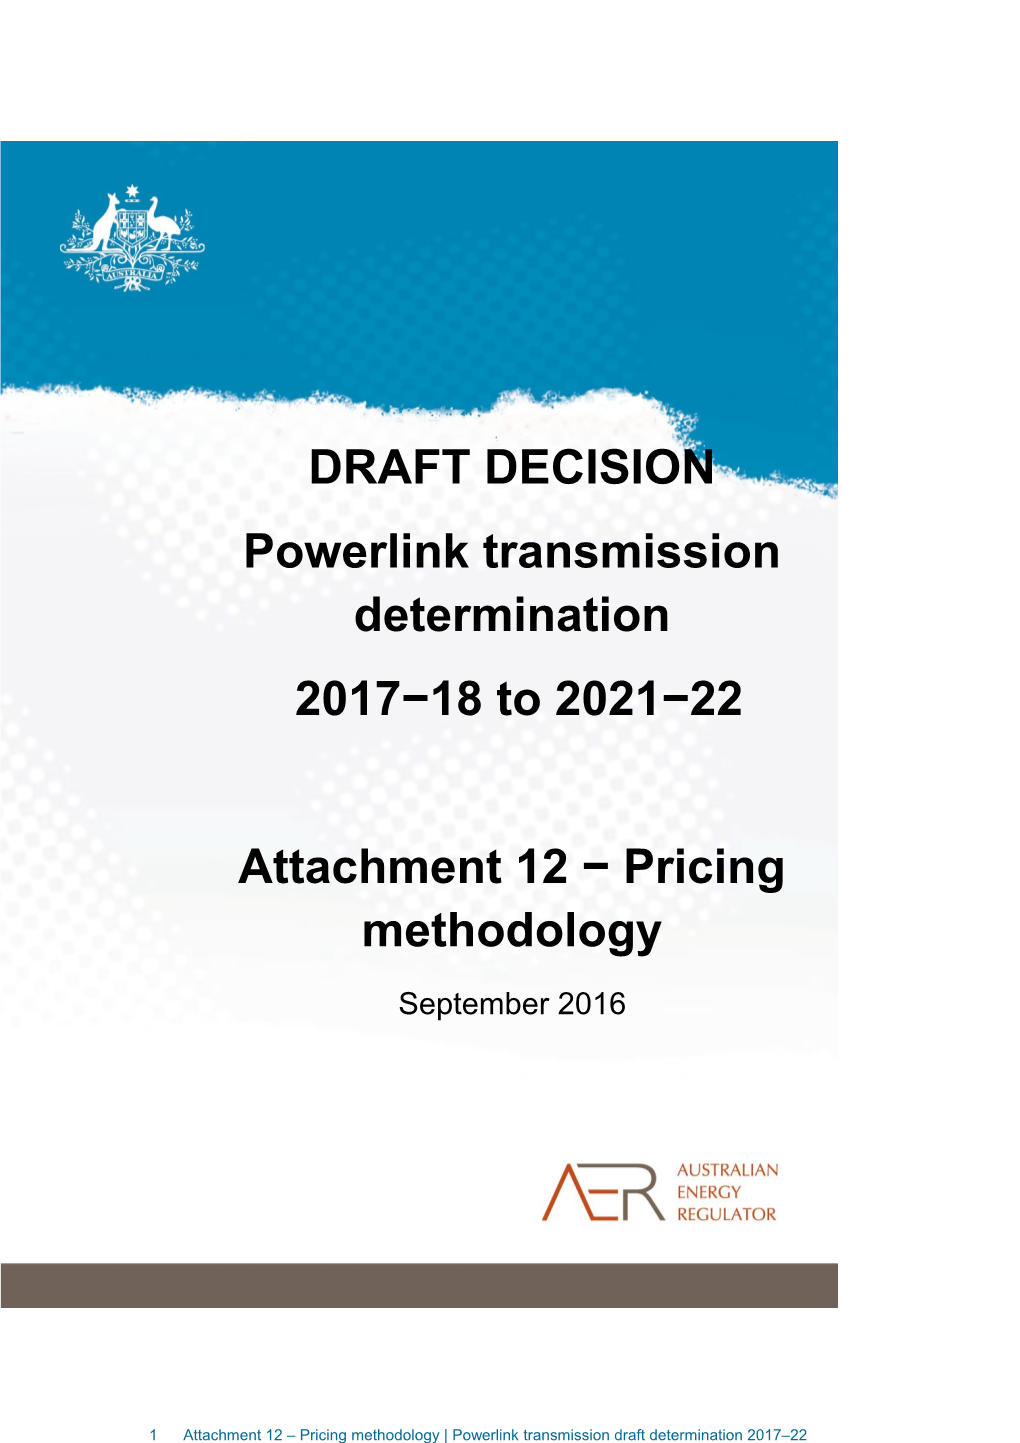 AER Draft Decision - Powerlink - Attachment 12 - Pricing Methodology